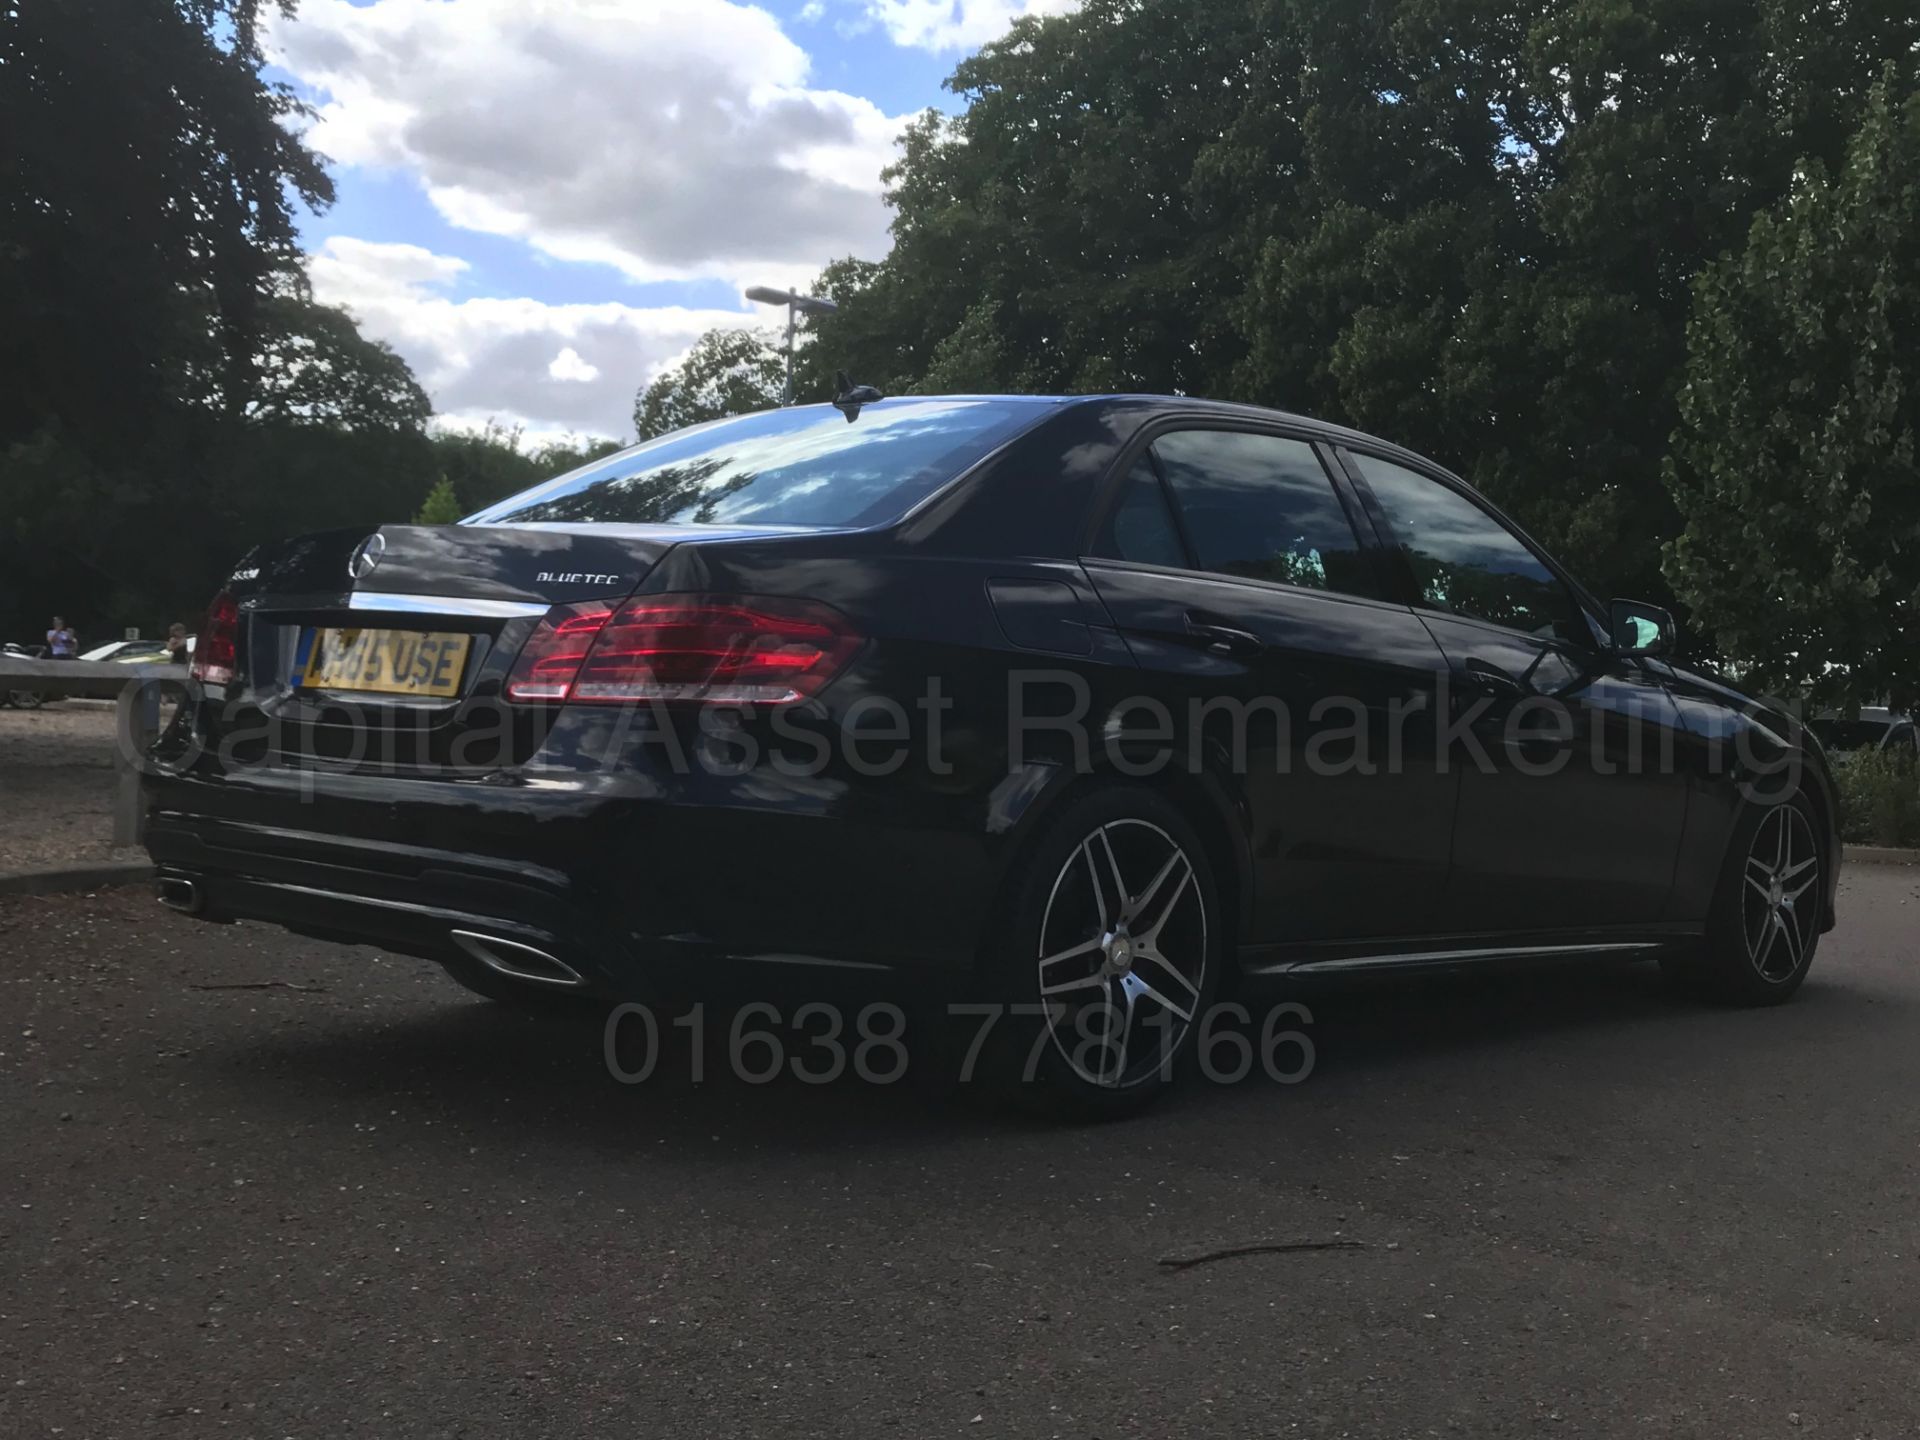 MERCEDES-BENZ E220D *AMG - NIGHT EDITION* SALOON (2016) '7G AUTO - LEATHER - SAT NAV' *LOW MILES* - Image 7 of 43